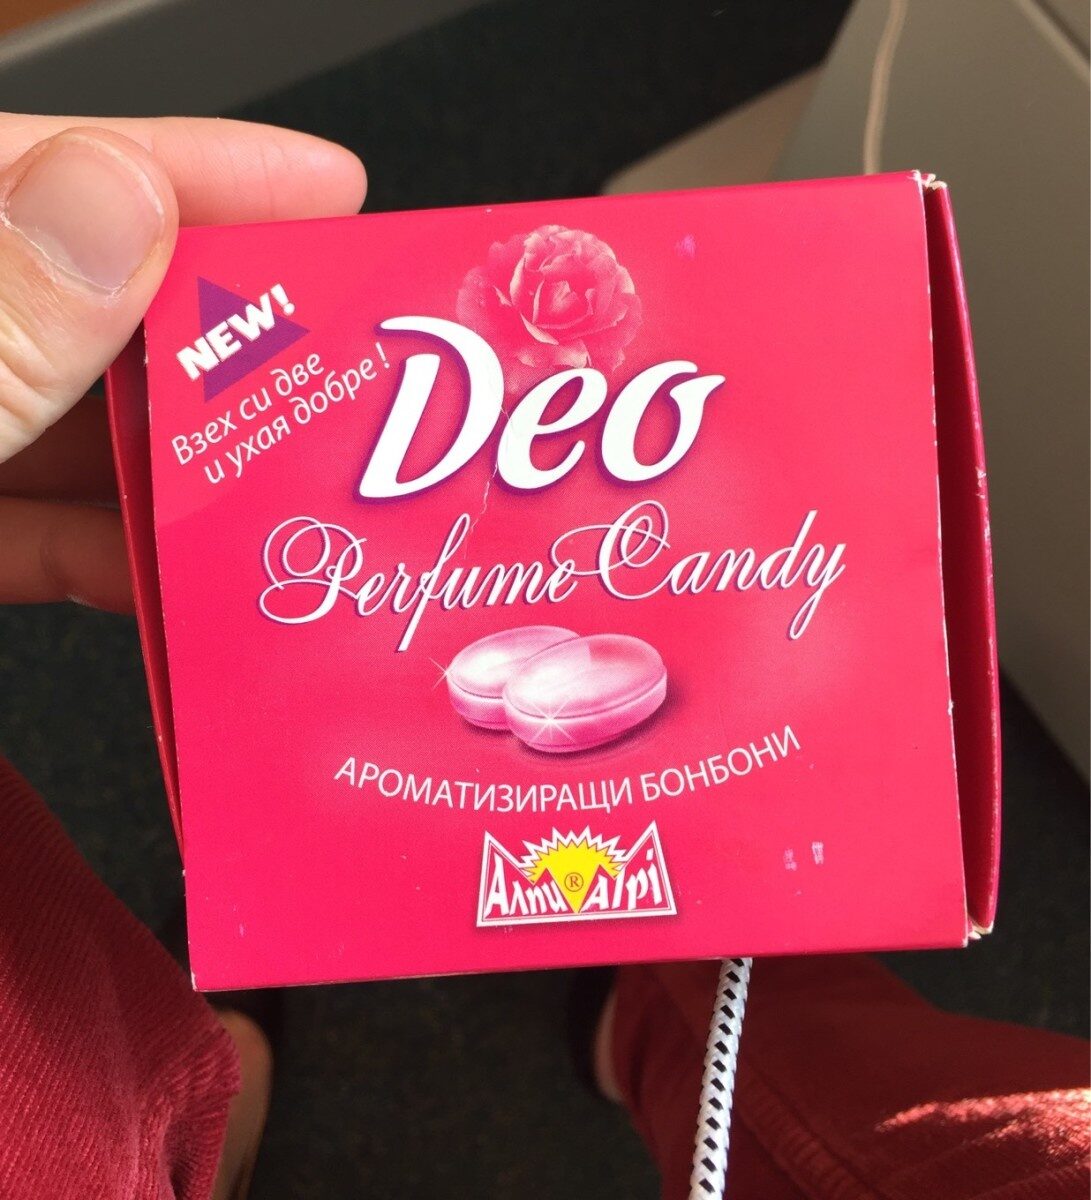 Deo perfume candy - Produkt - fr